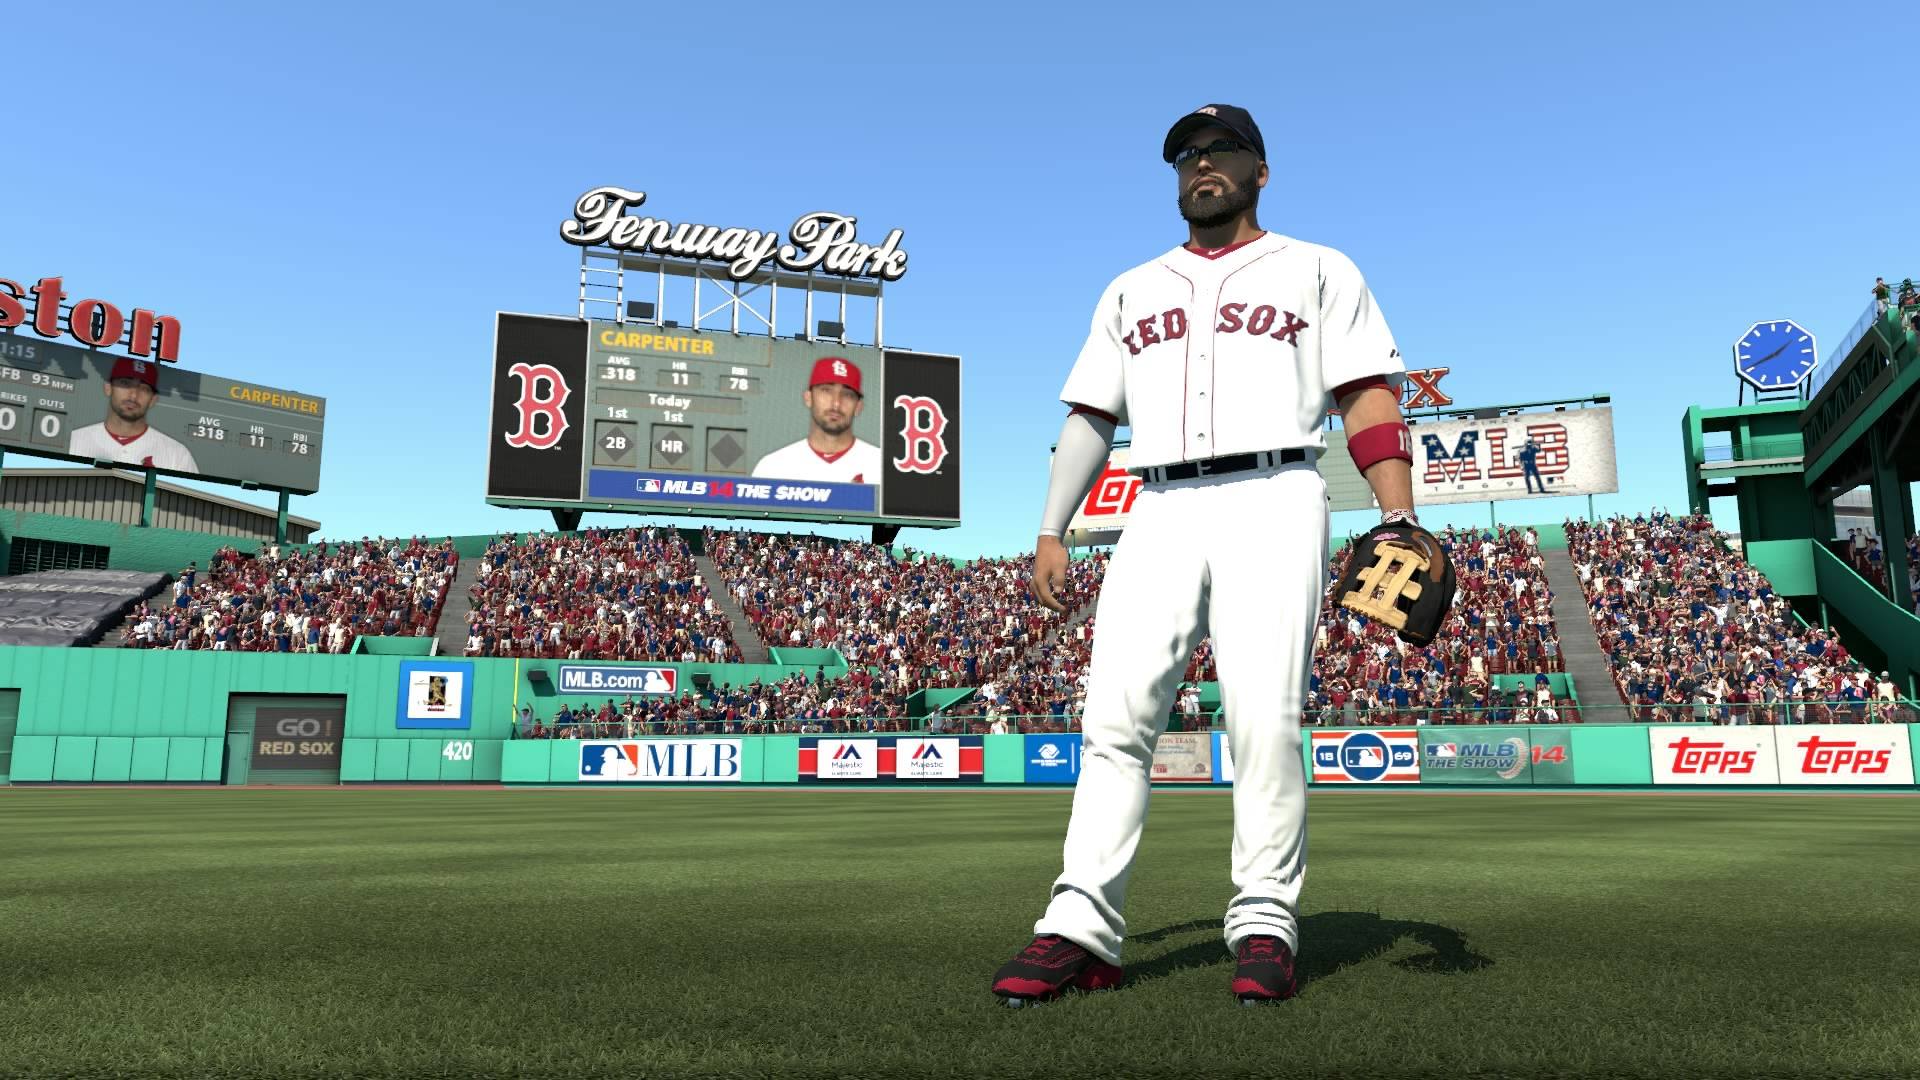 GameStop announces PS3-to-PS4 upgrade offer for MLB 14: The Show - GameSpot